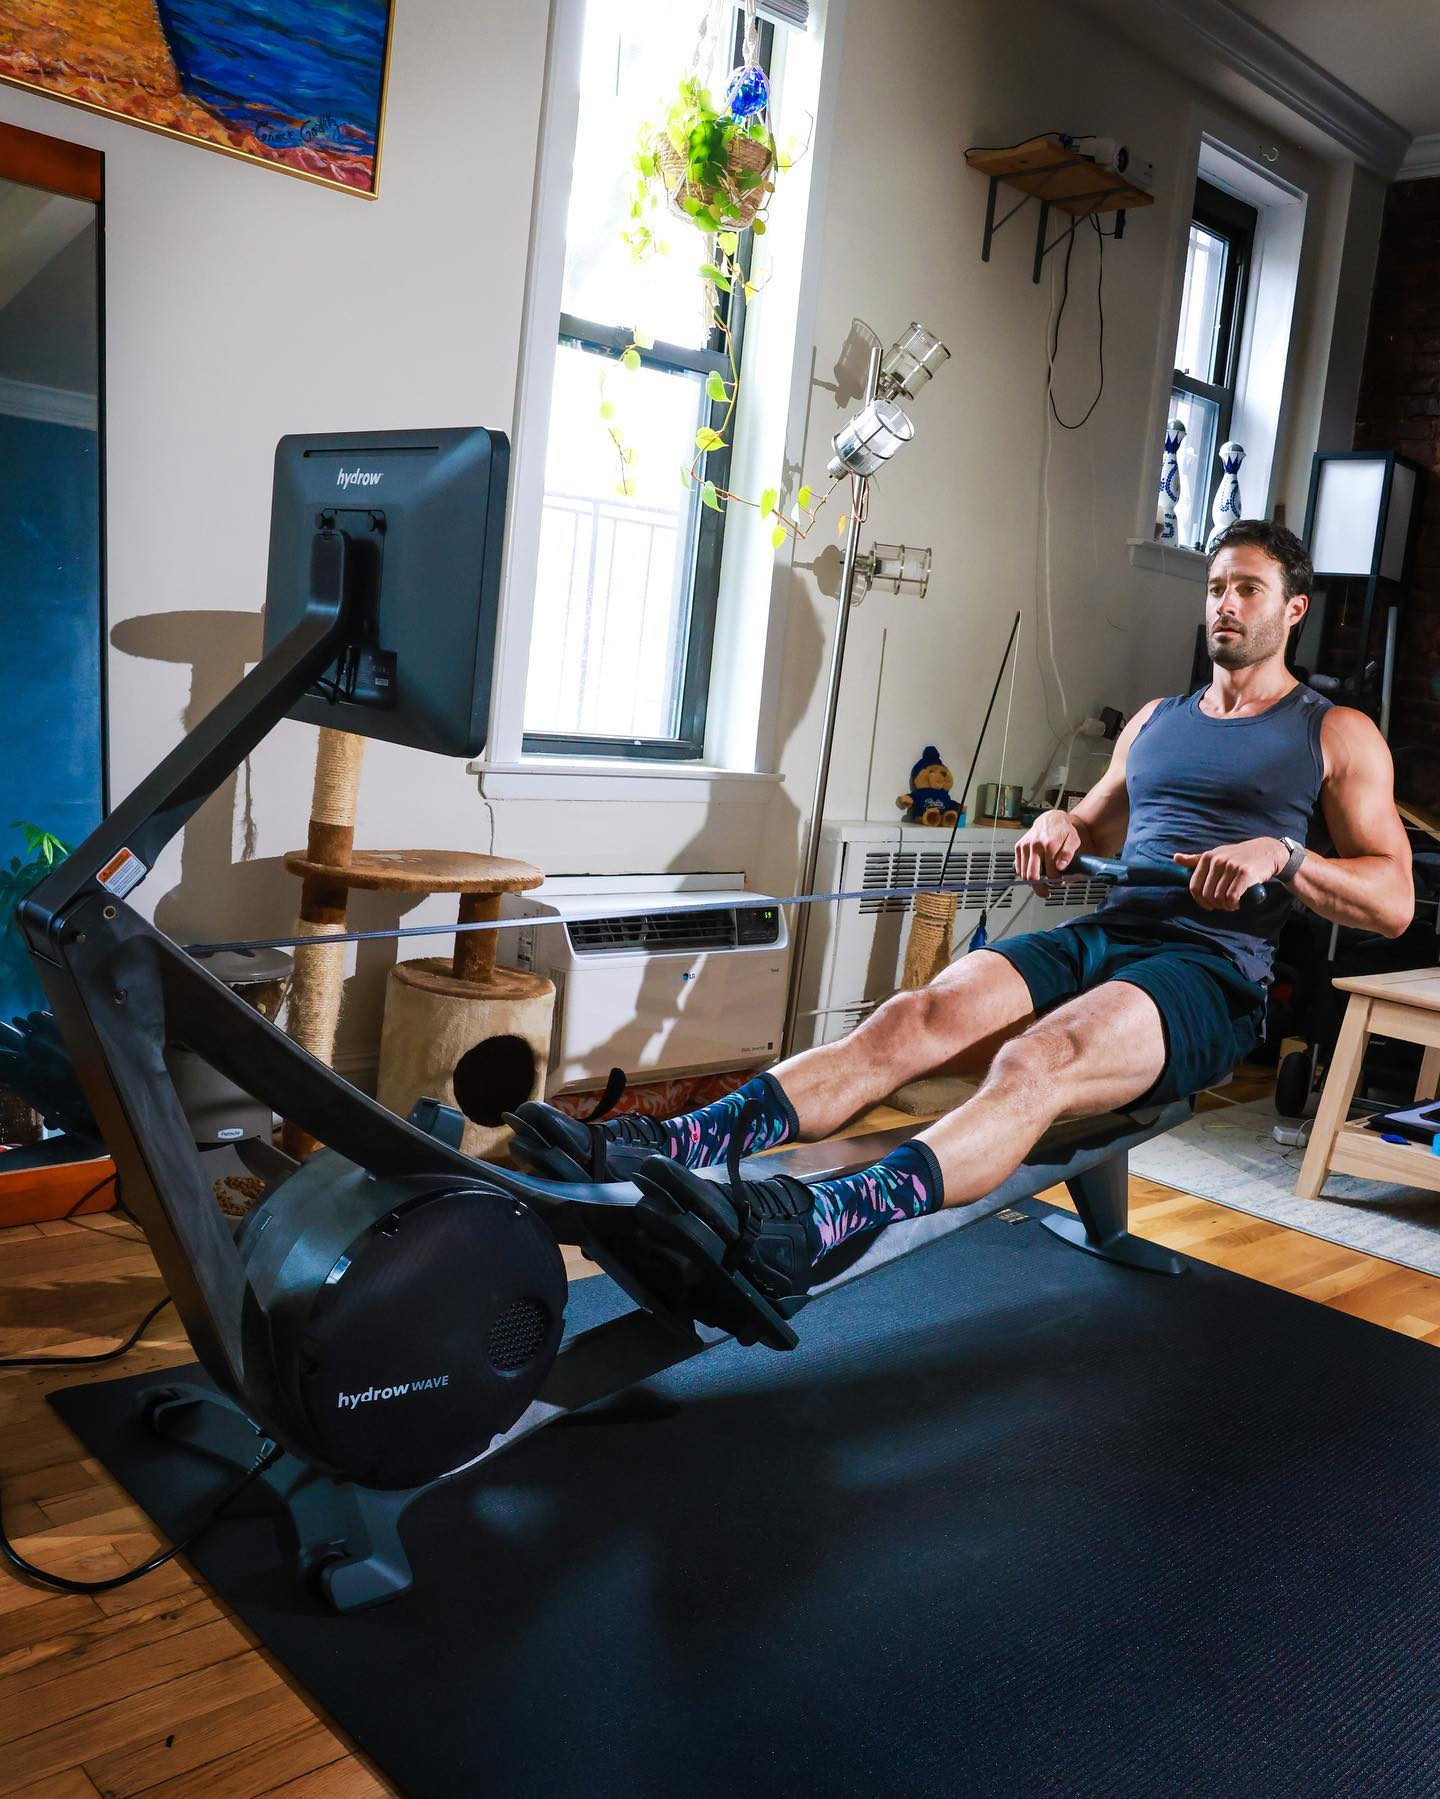 The Best Rowing Machines for Fun, Efficient Exercising at Home